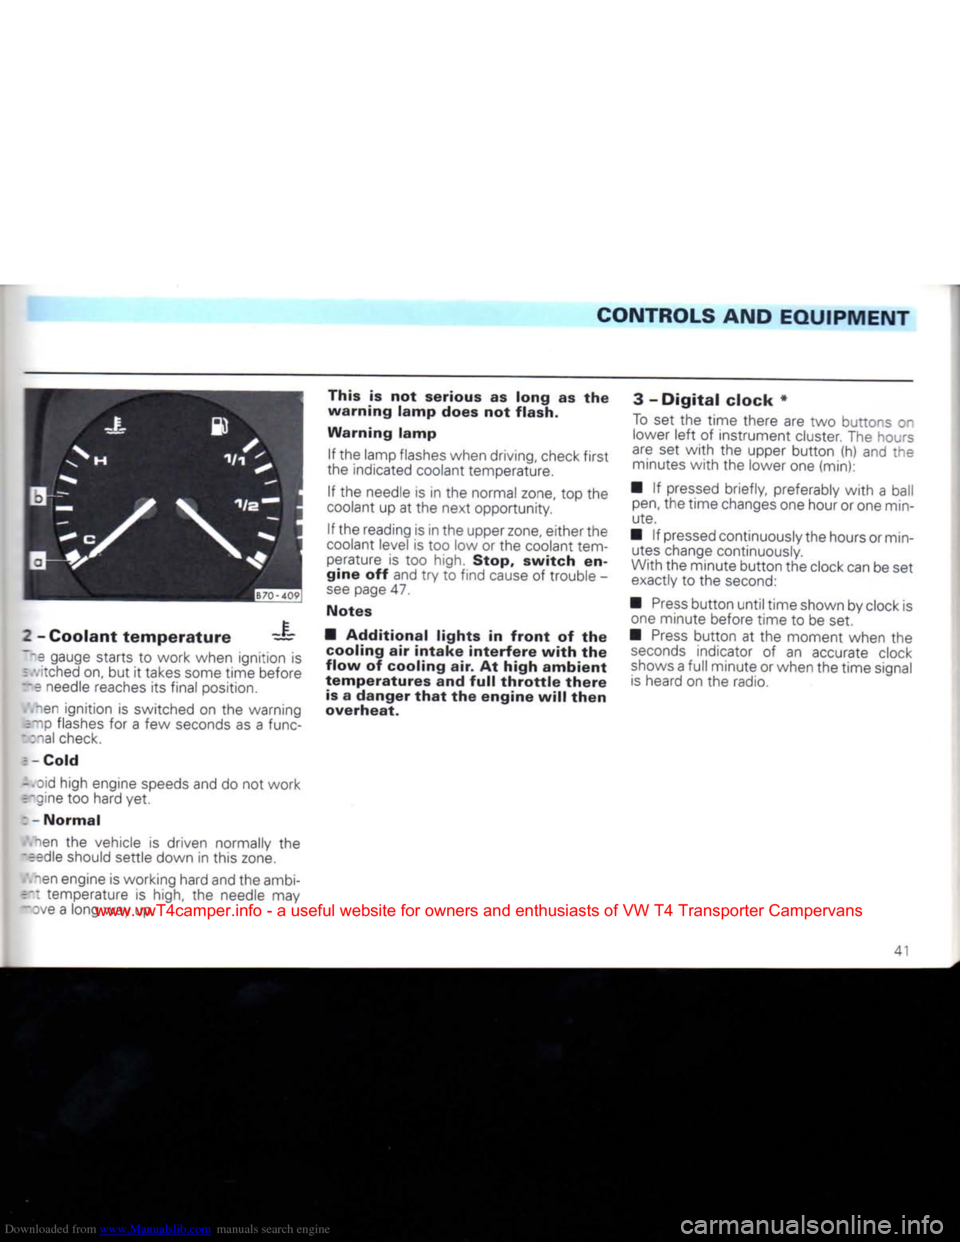 VOLKSWAGEN CARAVELLE 1992 T4 / 4.G Owners Manual Downloaded from www.Manualslib.com manuals search engine 
CONTROLS AND EQUIPMENT 

2
 -
 Coolant temperature
 — 
~~s
 gauge starts
 to
 work
 when ignition
 is 
 =
 .vitched on,
 but it
 takes some 